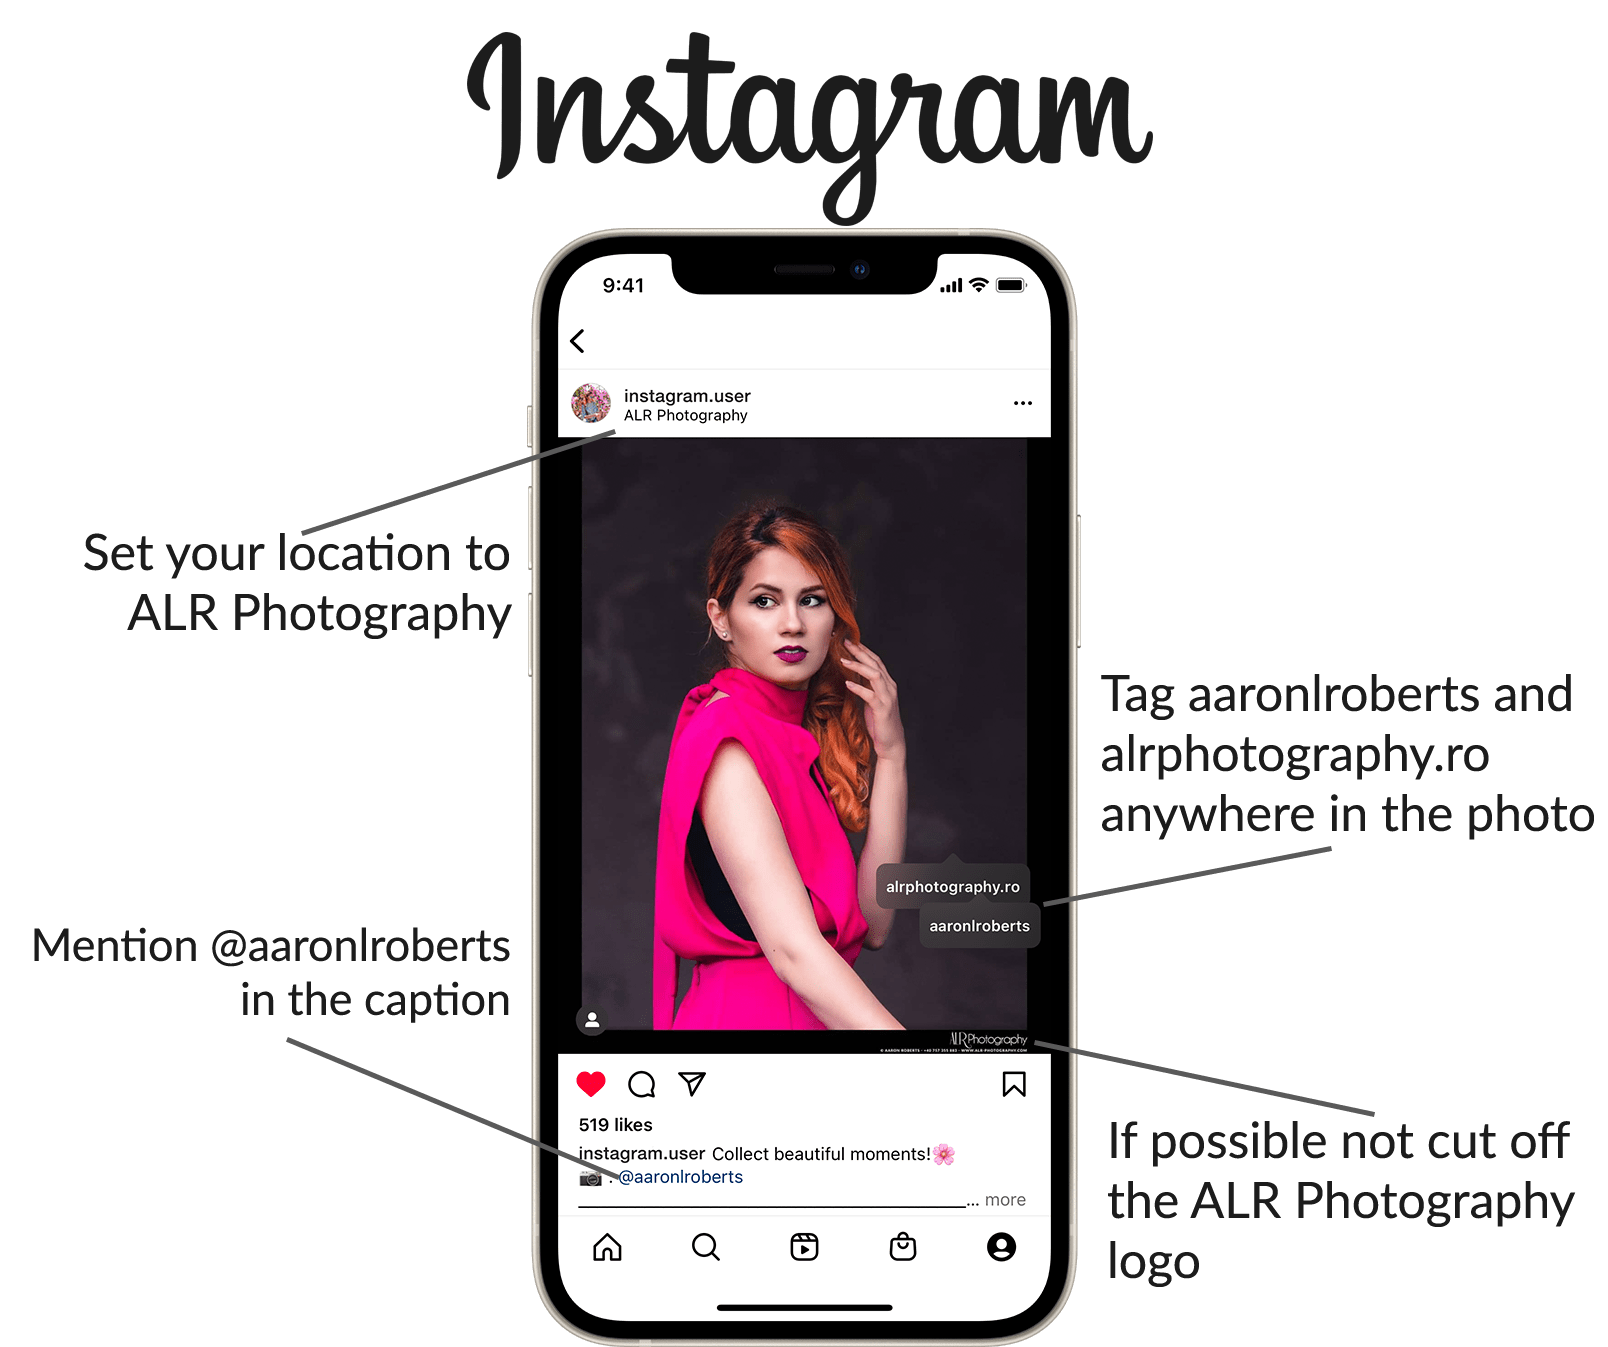 Set your location to ALR Photography. Mention @aaronlroberts in the caption. Tag aaroniroberts and aaronlroberts anywhere in the photo. If possible not cut off the ALR Photography logo